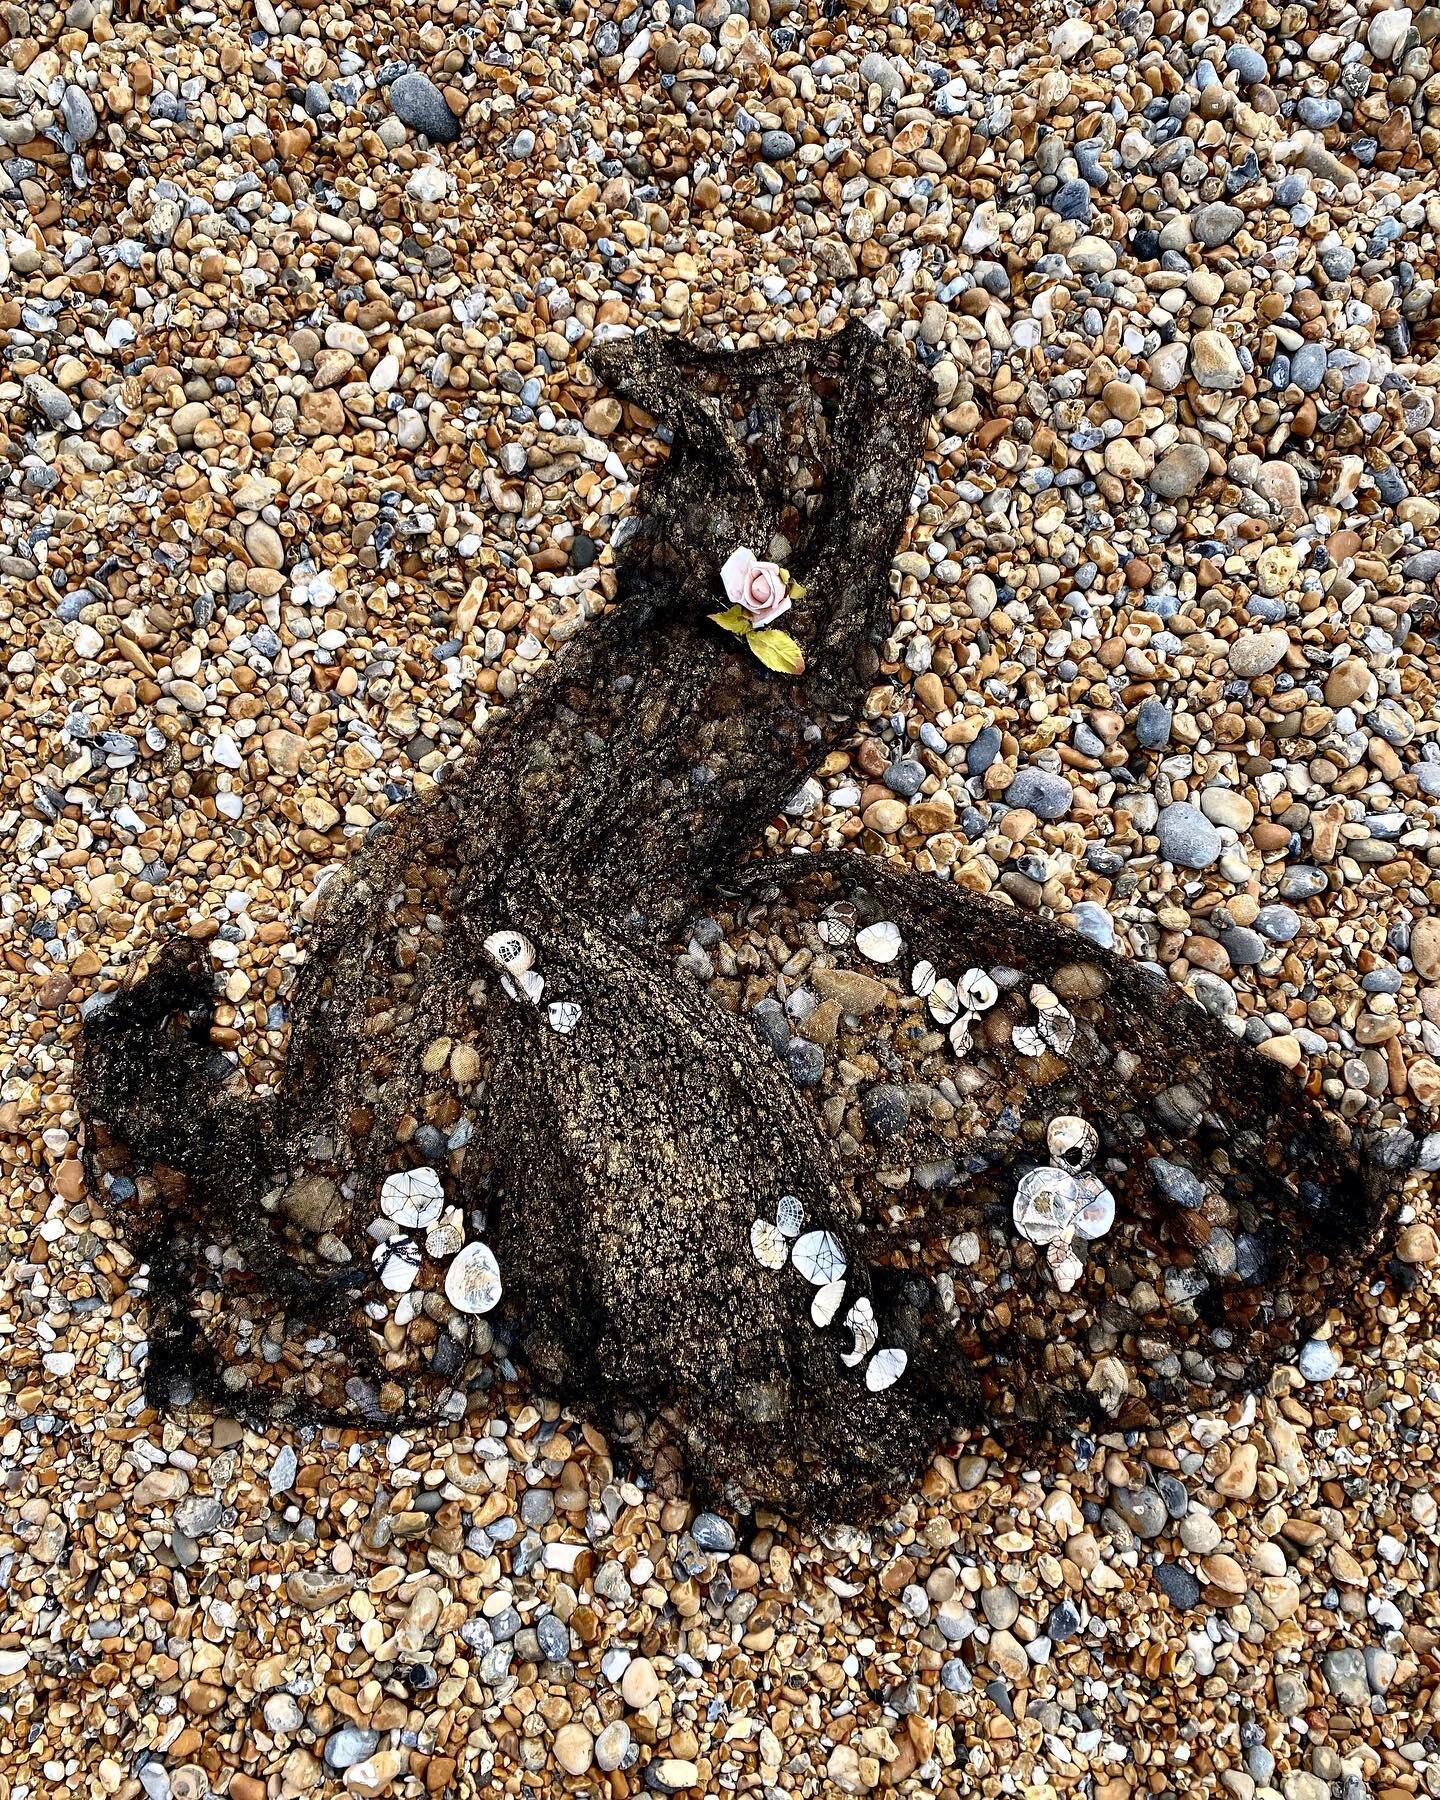 Playing with lace and shells on the beach early this morning. Part of the &lsquo;All she wanted to do was fly...&rsquo; work. 

Trying to stay positive. And sending love out. 

#fly #antiqueclothing #lace #recycledfashion #stleonardsonsea #hastings #